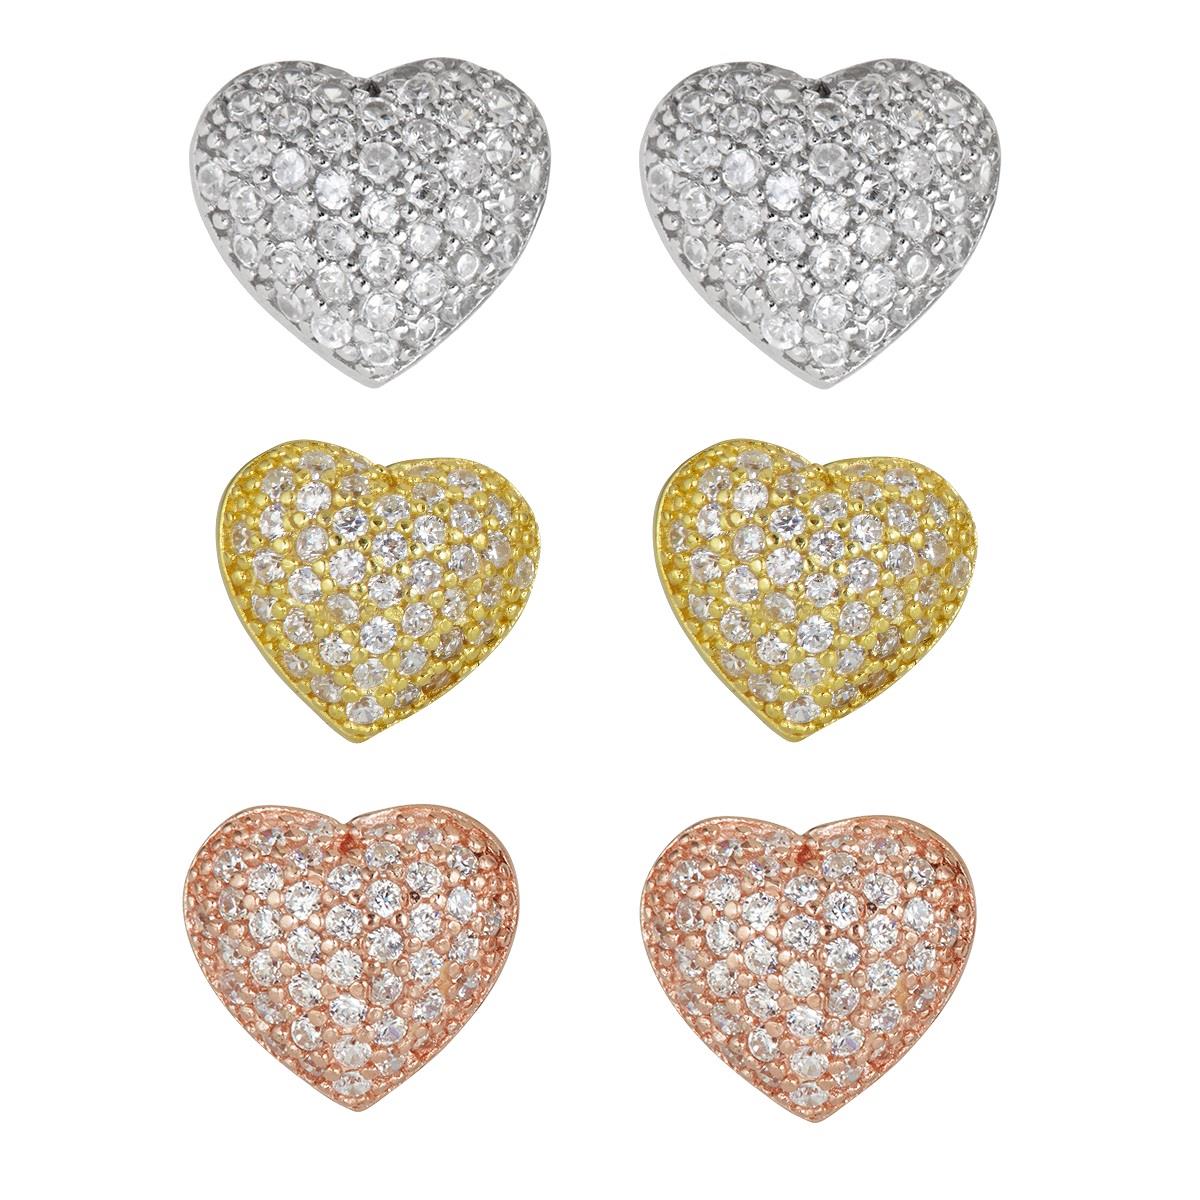 Sterling Silver Tricolor Micropave Puffed Heart Stud Earring Set